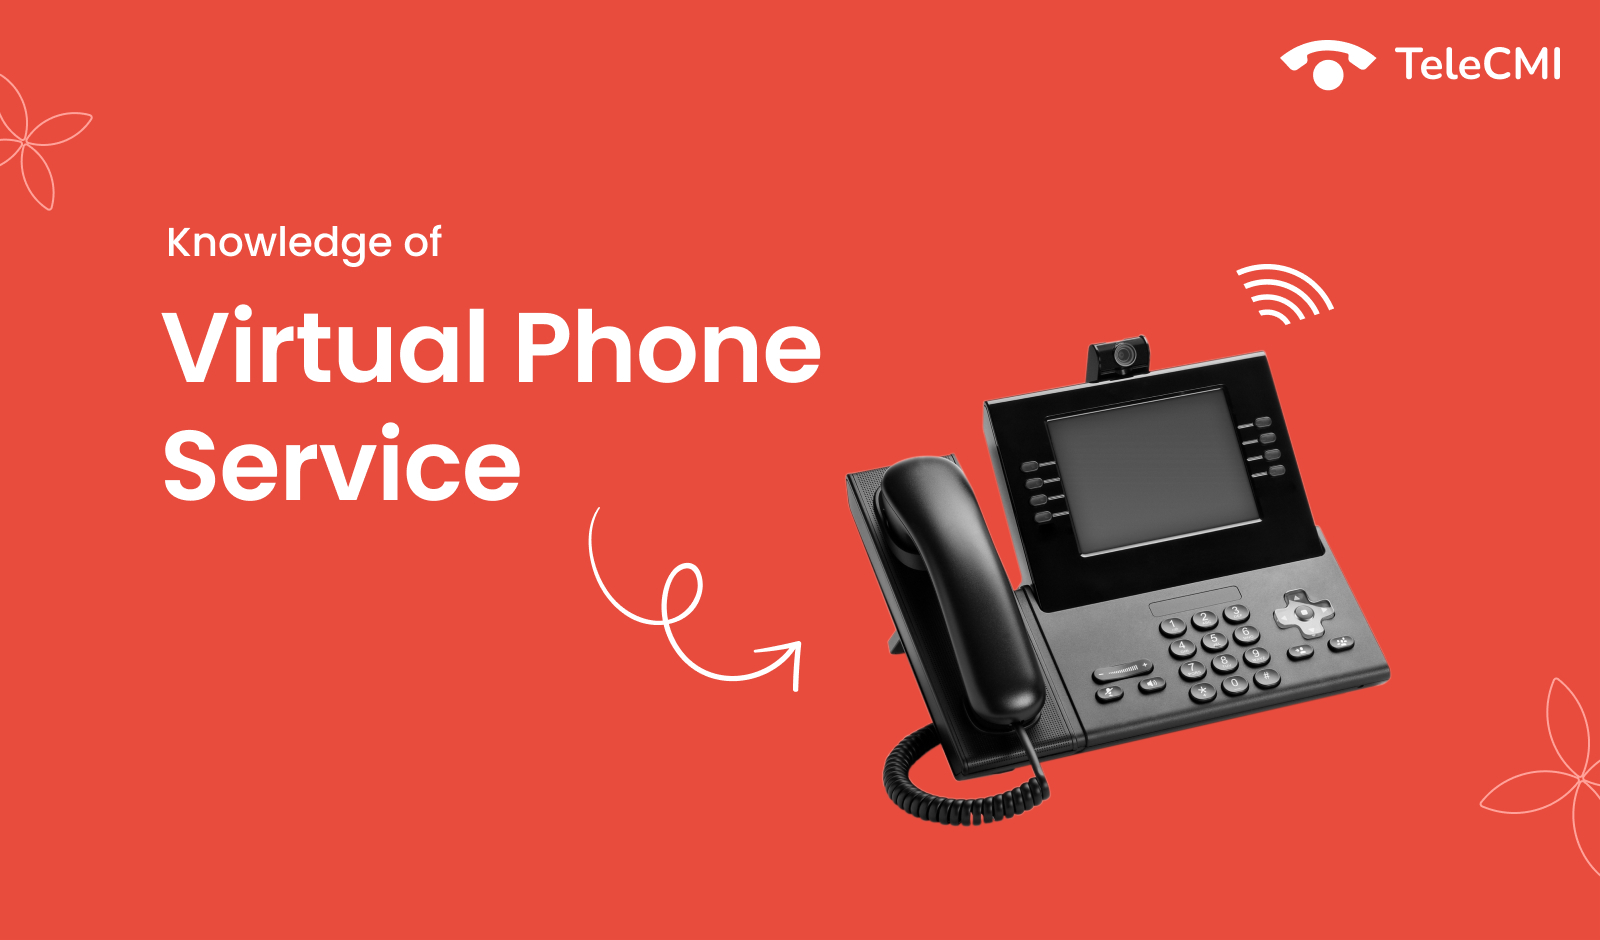 What is a Virtual Phone Service?